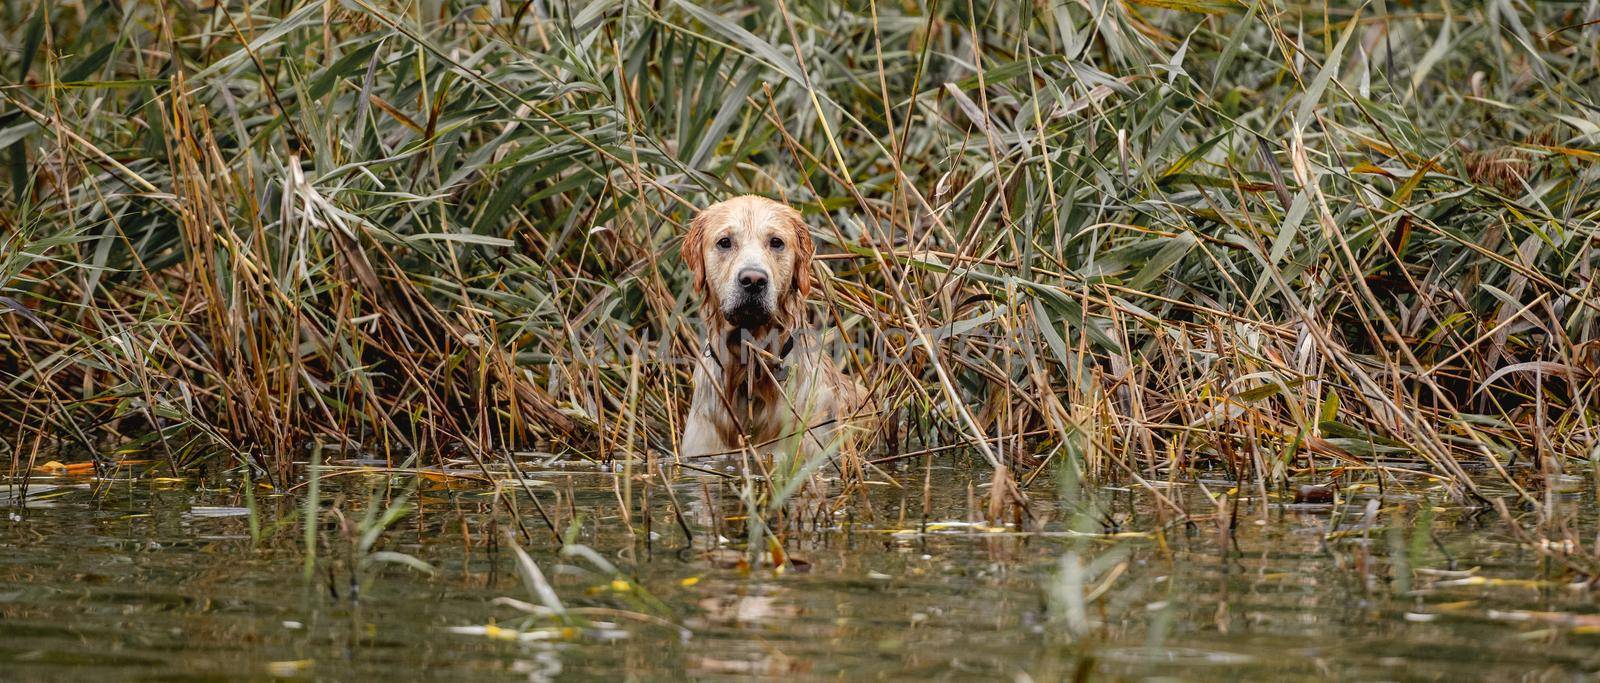 Golden retriever dog hunter chases in pond at autumn park. Pet doggy labrador sitting in lake river outdoors and waiting